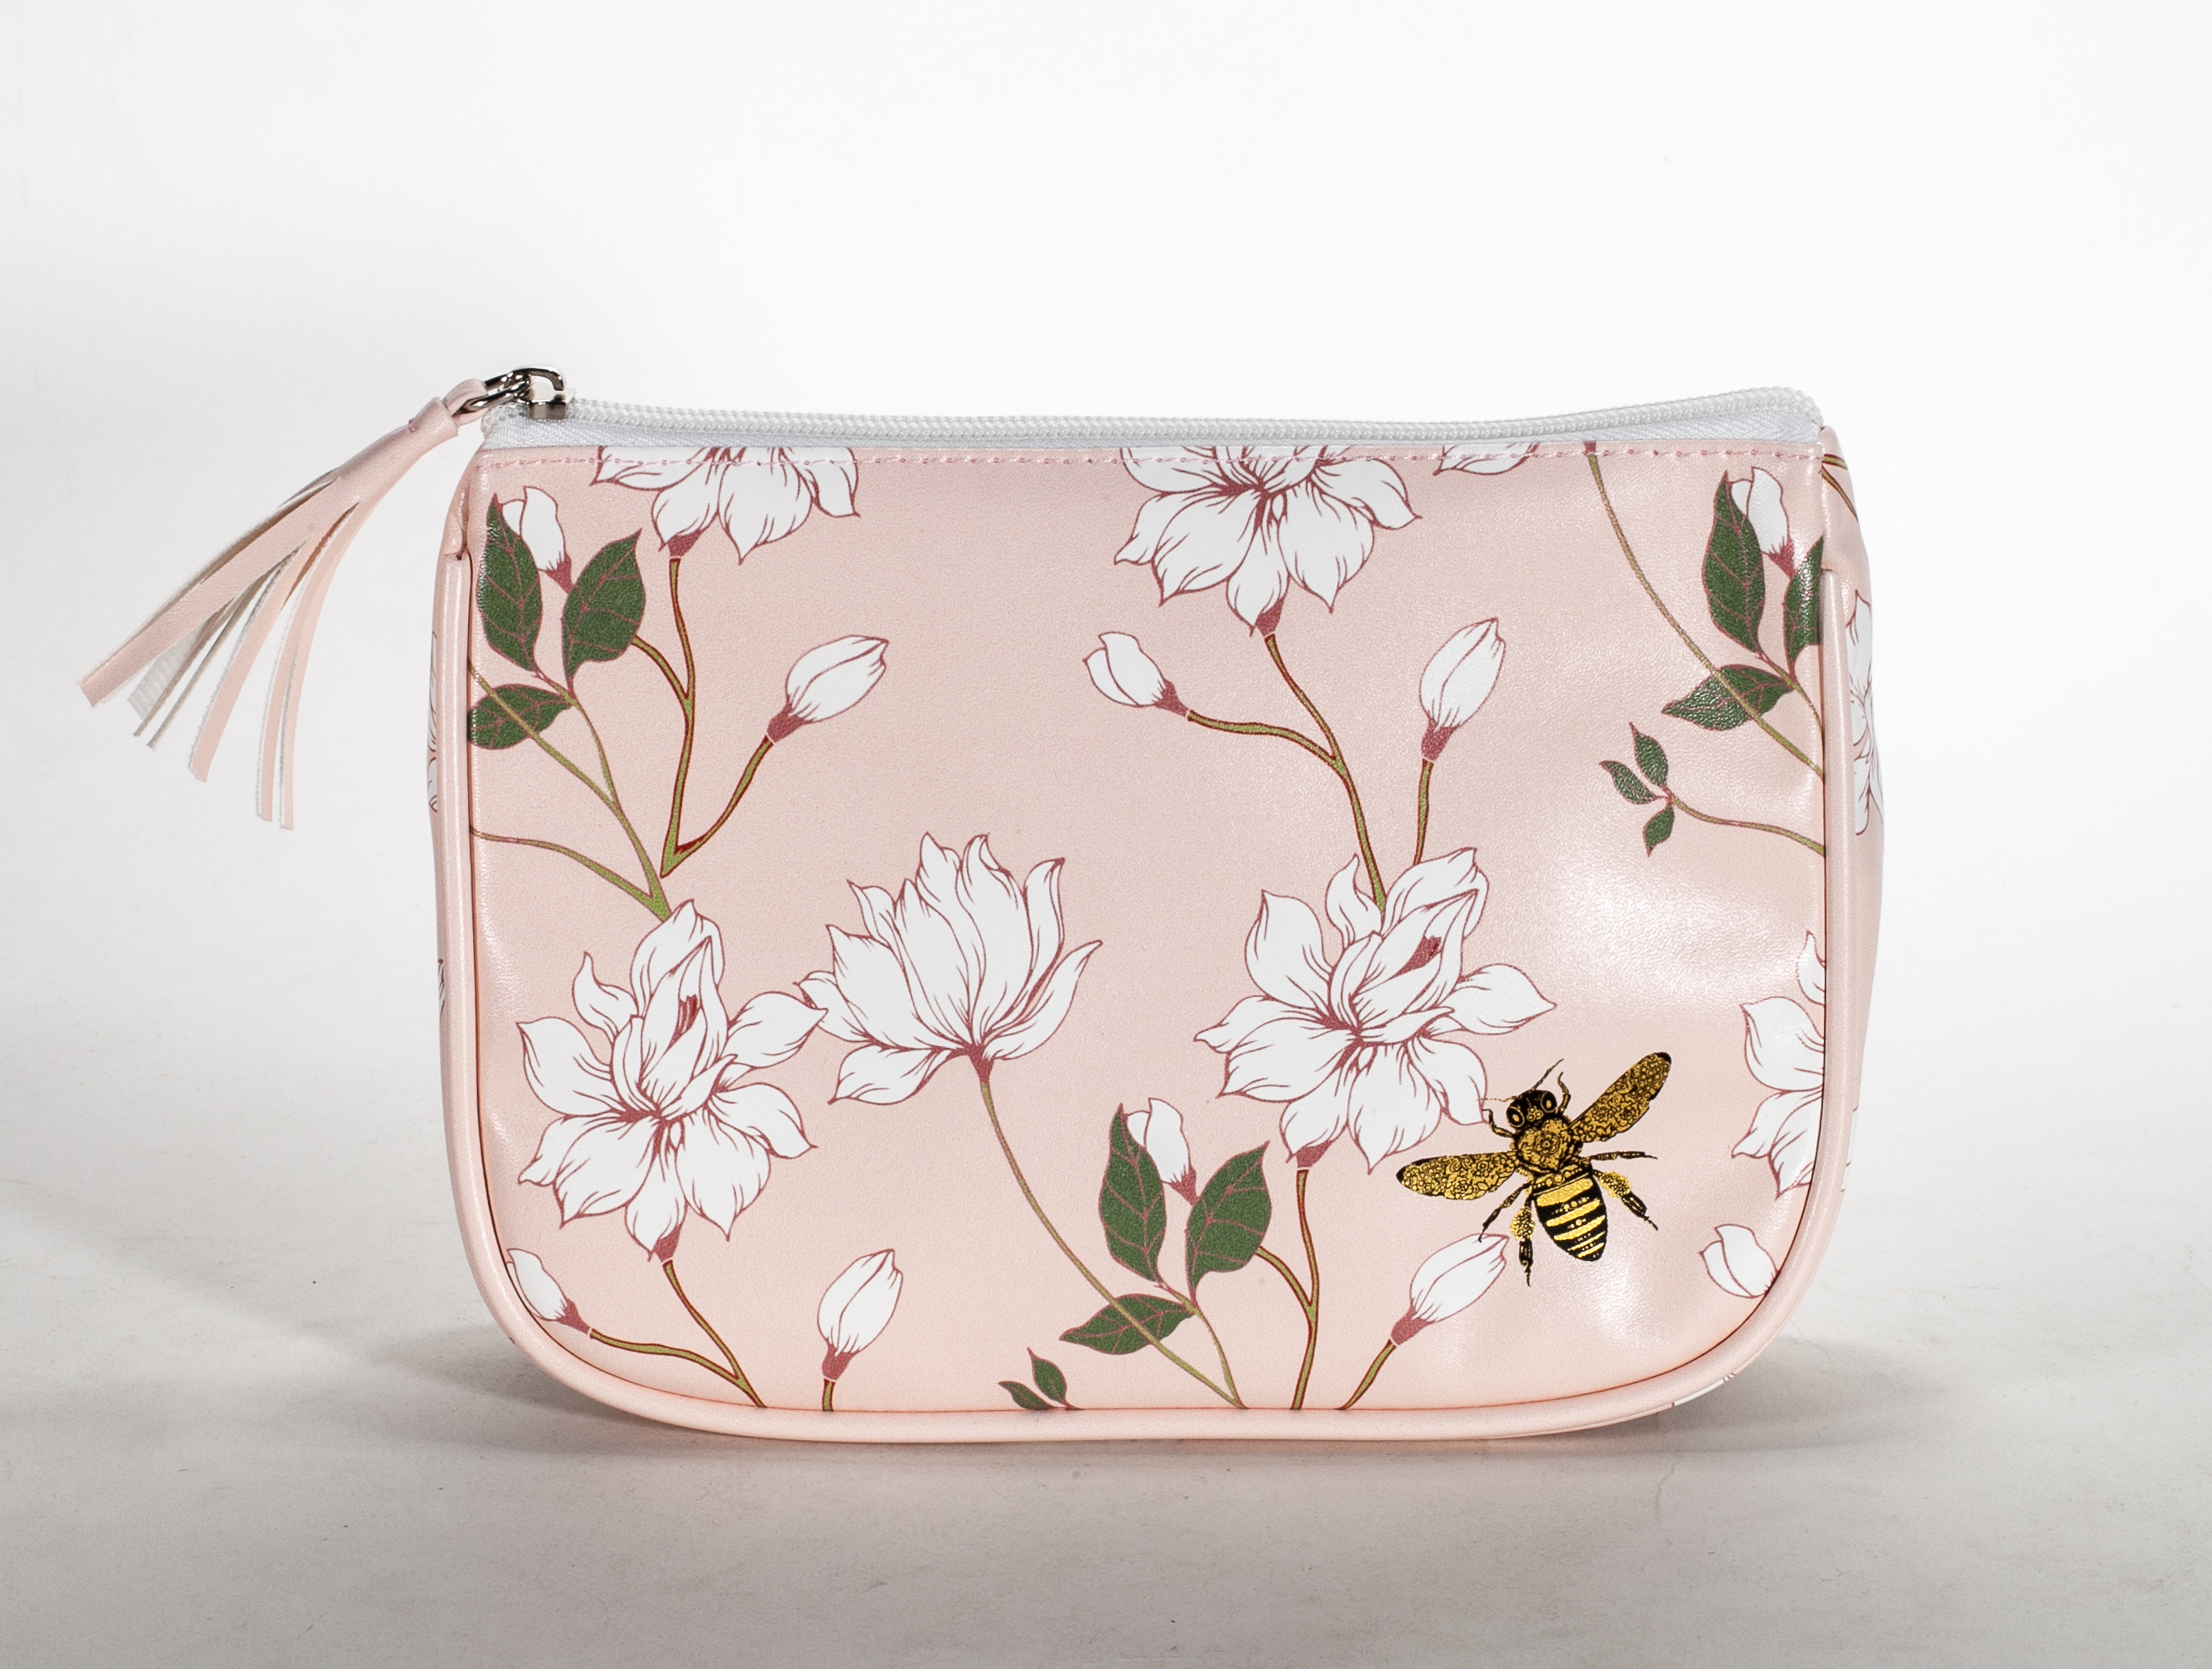 2021 Sunglasses, A Soft Case with A Fleshy Pink Peony Pattern And Plenty of Room for Tools, Makeup Cases, And More